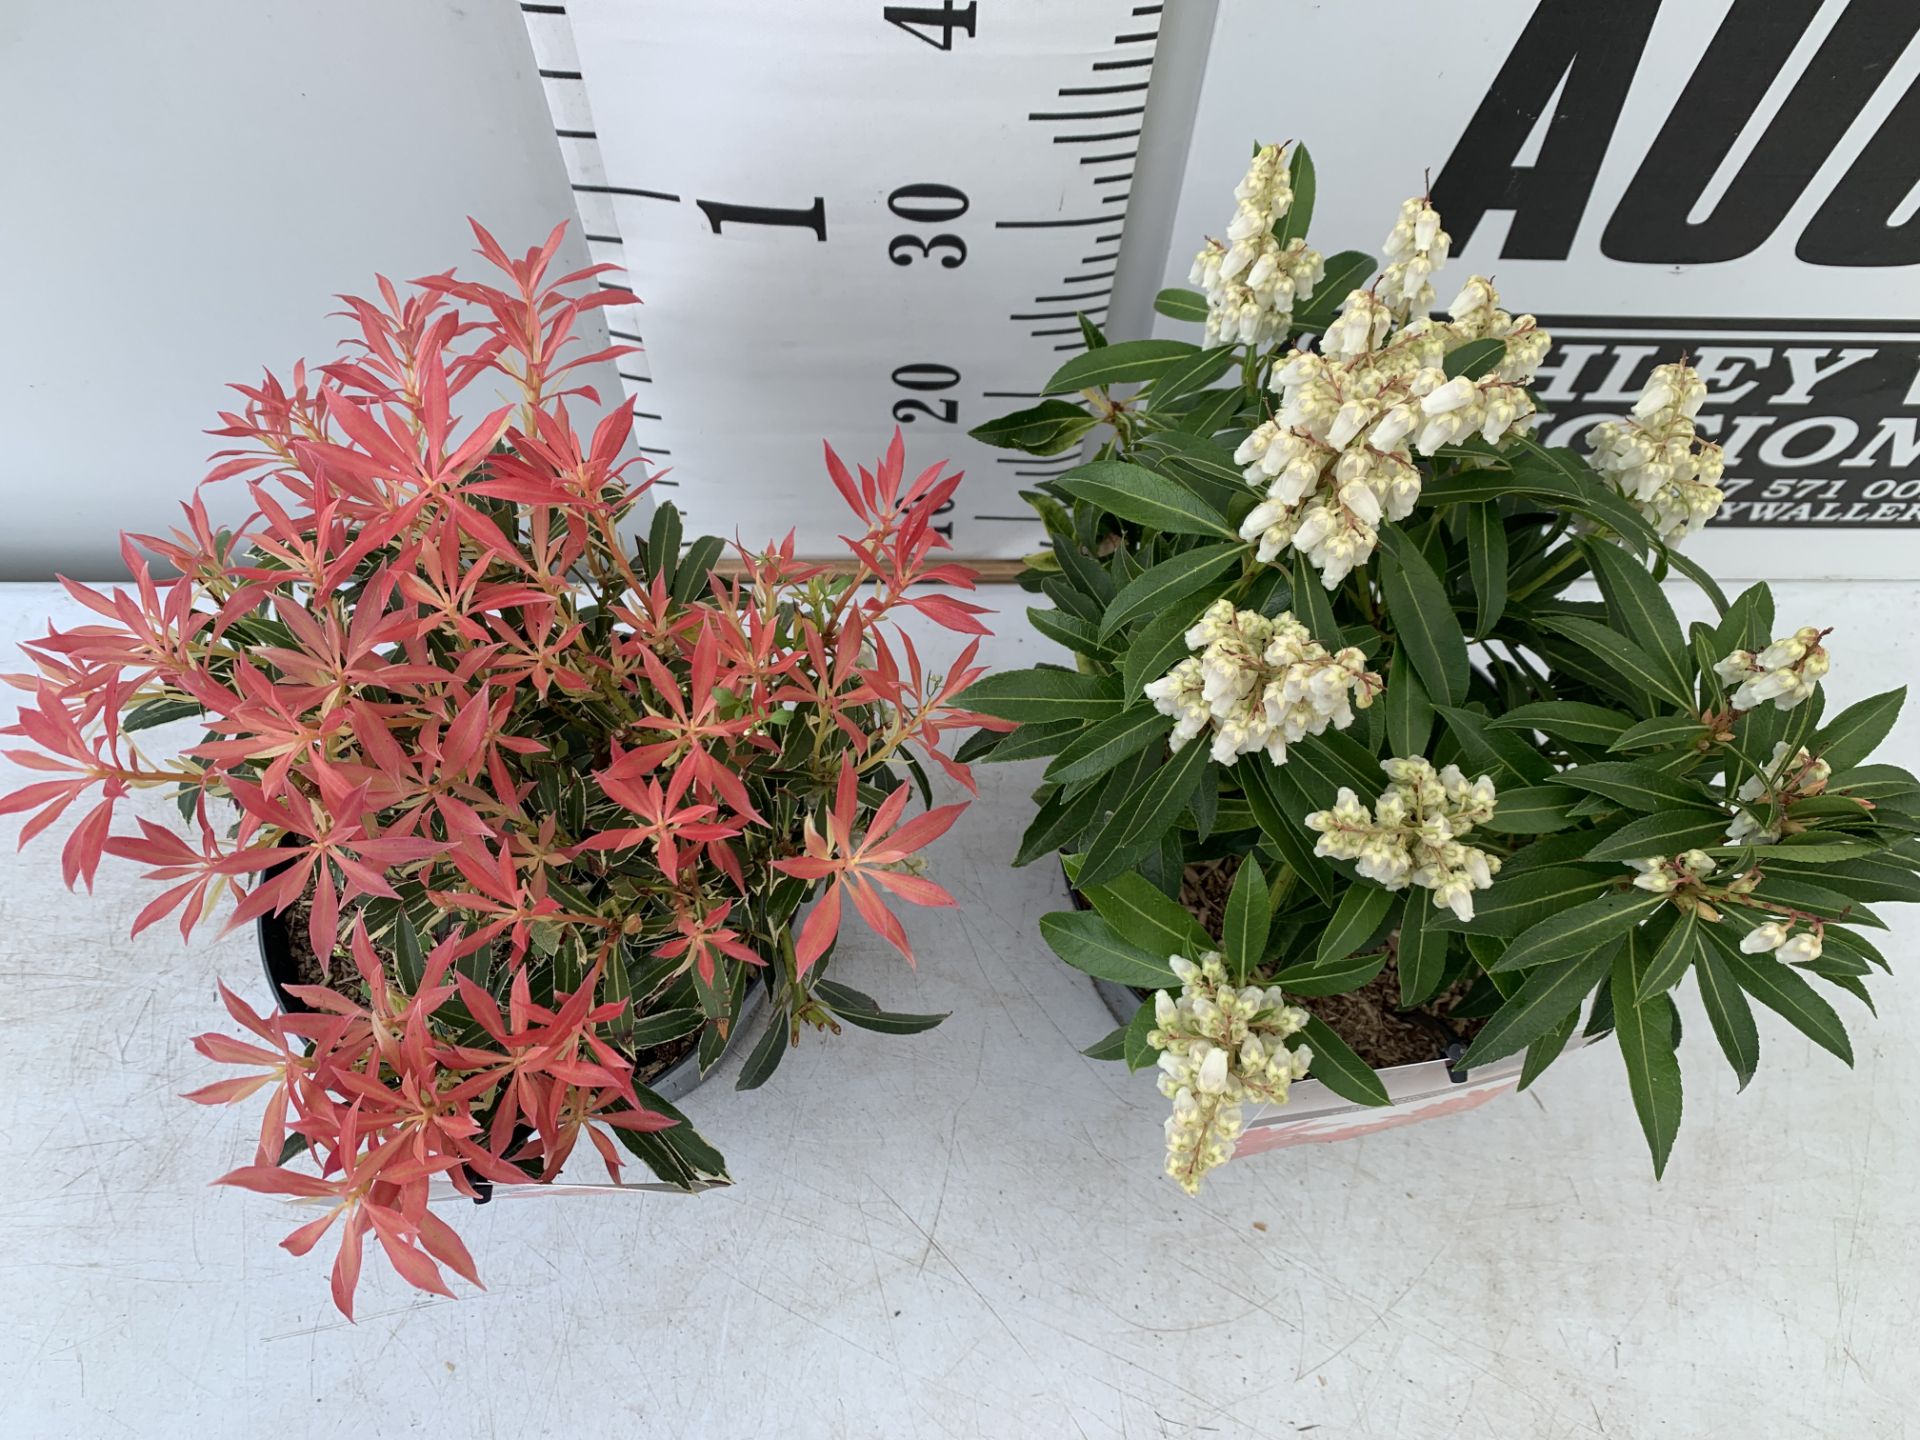 TWO PIERIS JAPONICA FORSET FLAME AND FLAMING SILVER IN 3 LTR POTS 40CM TALL PLUS VAT TO BE SOLD - Image 3 of 12